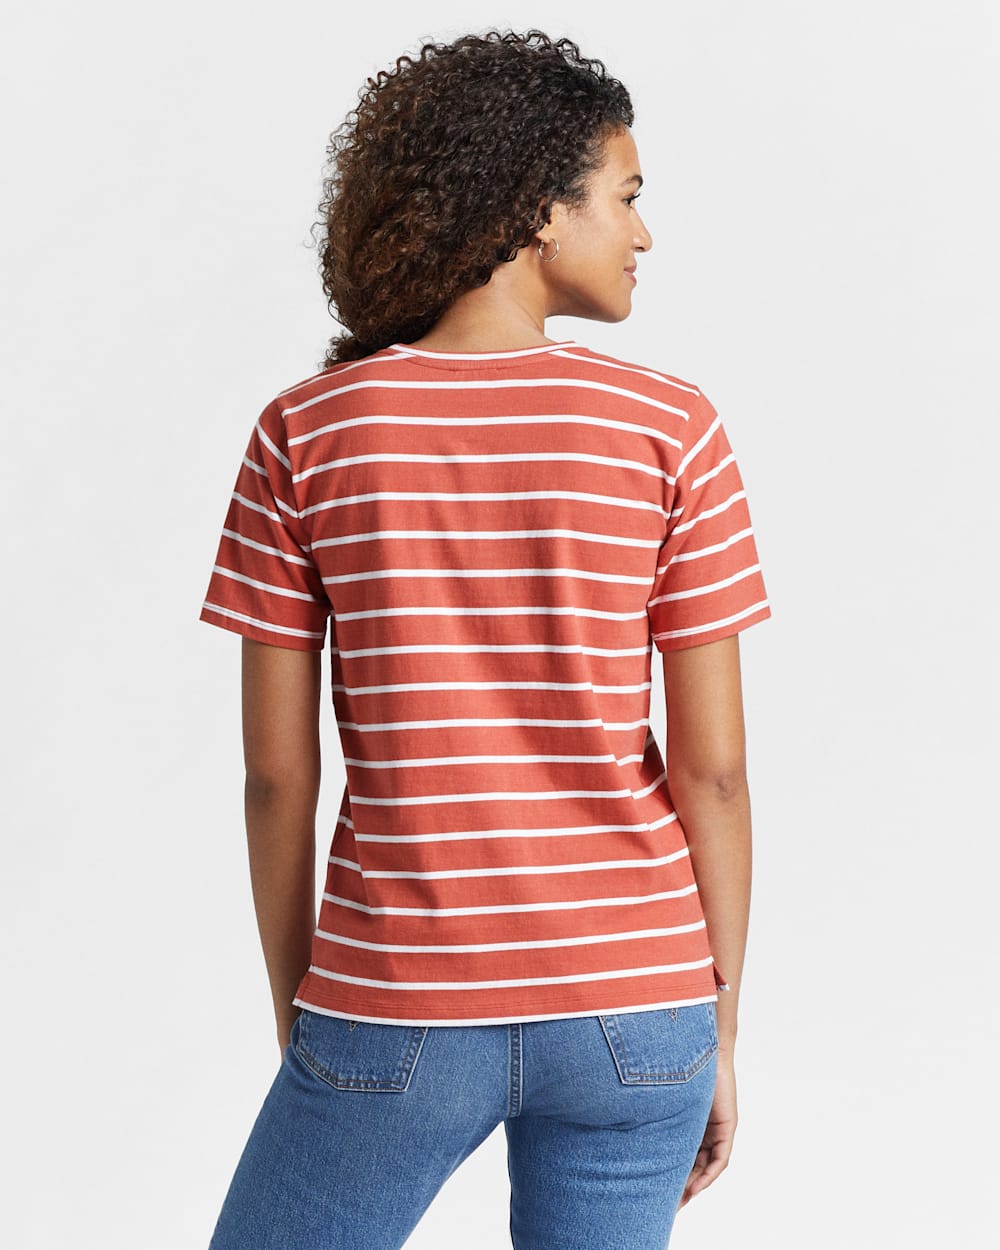 ALTERNATE VIEW OF WOMEN'S DESCHUTES STRIPE TEE IN SPICE RED/WHITE image number 3